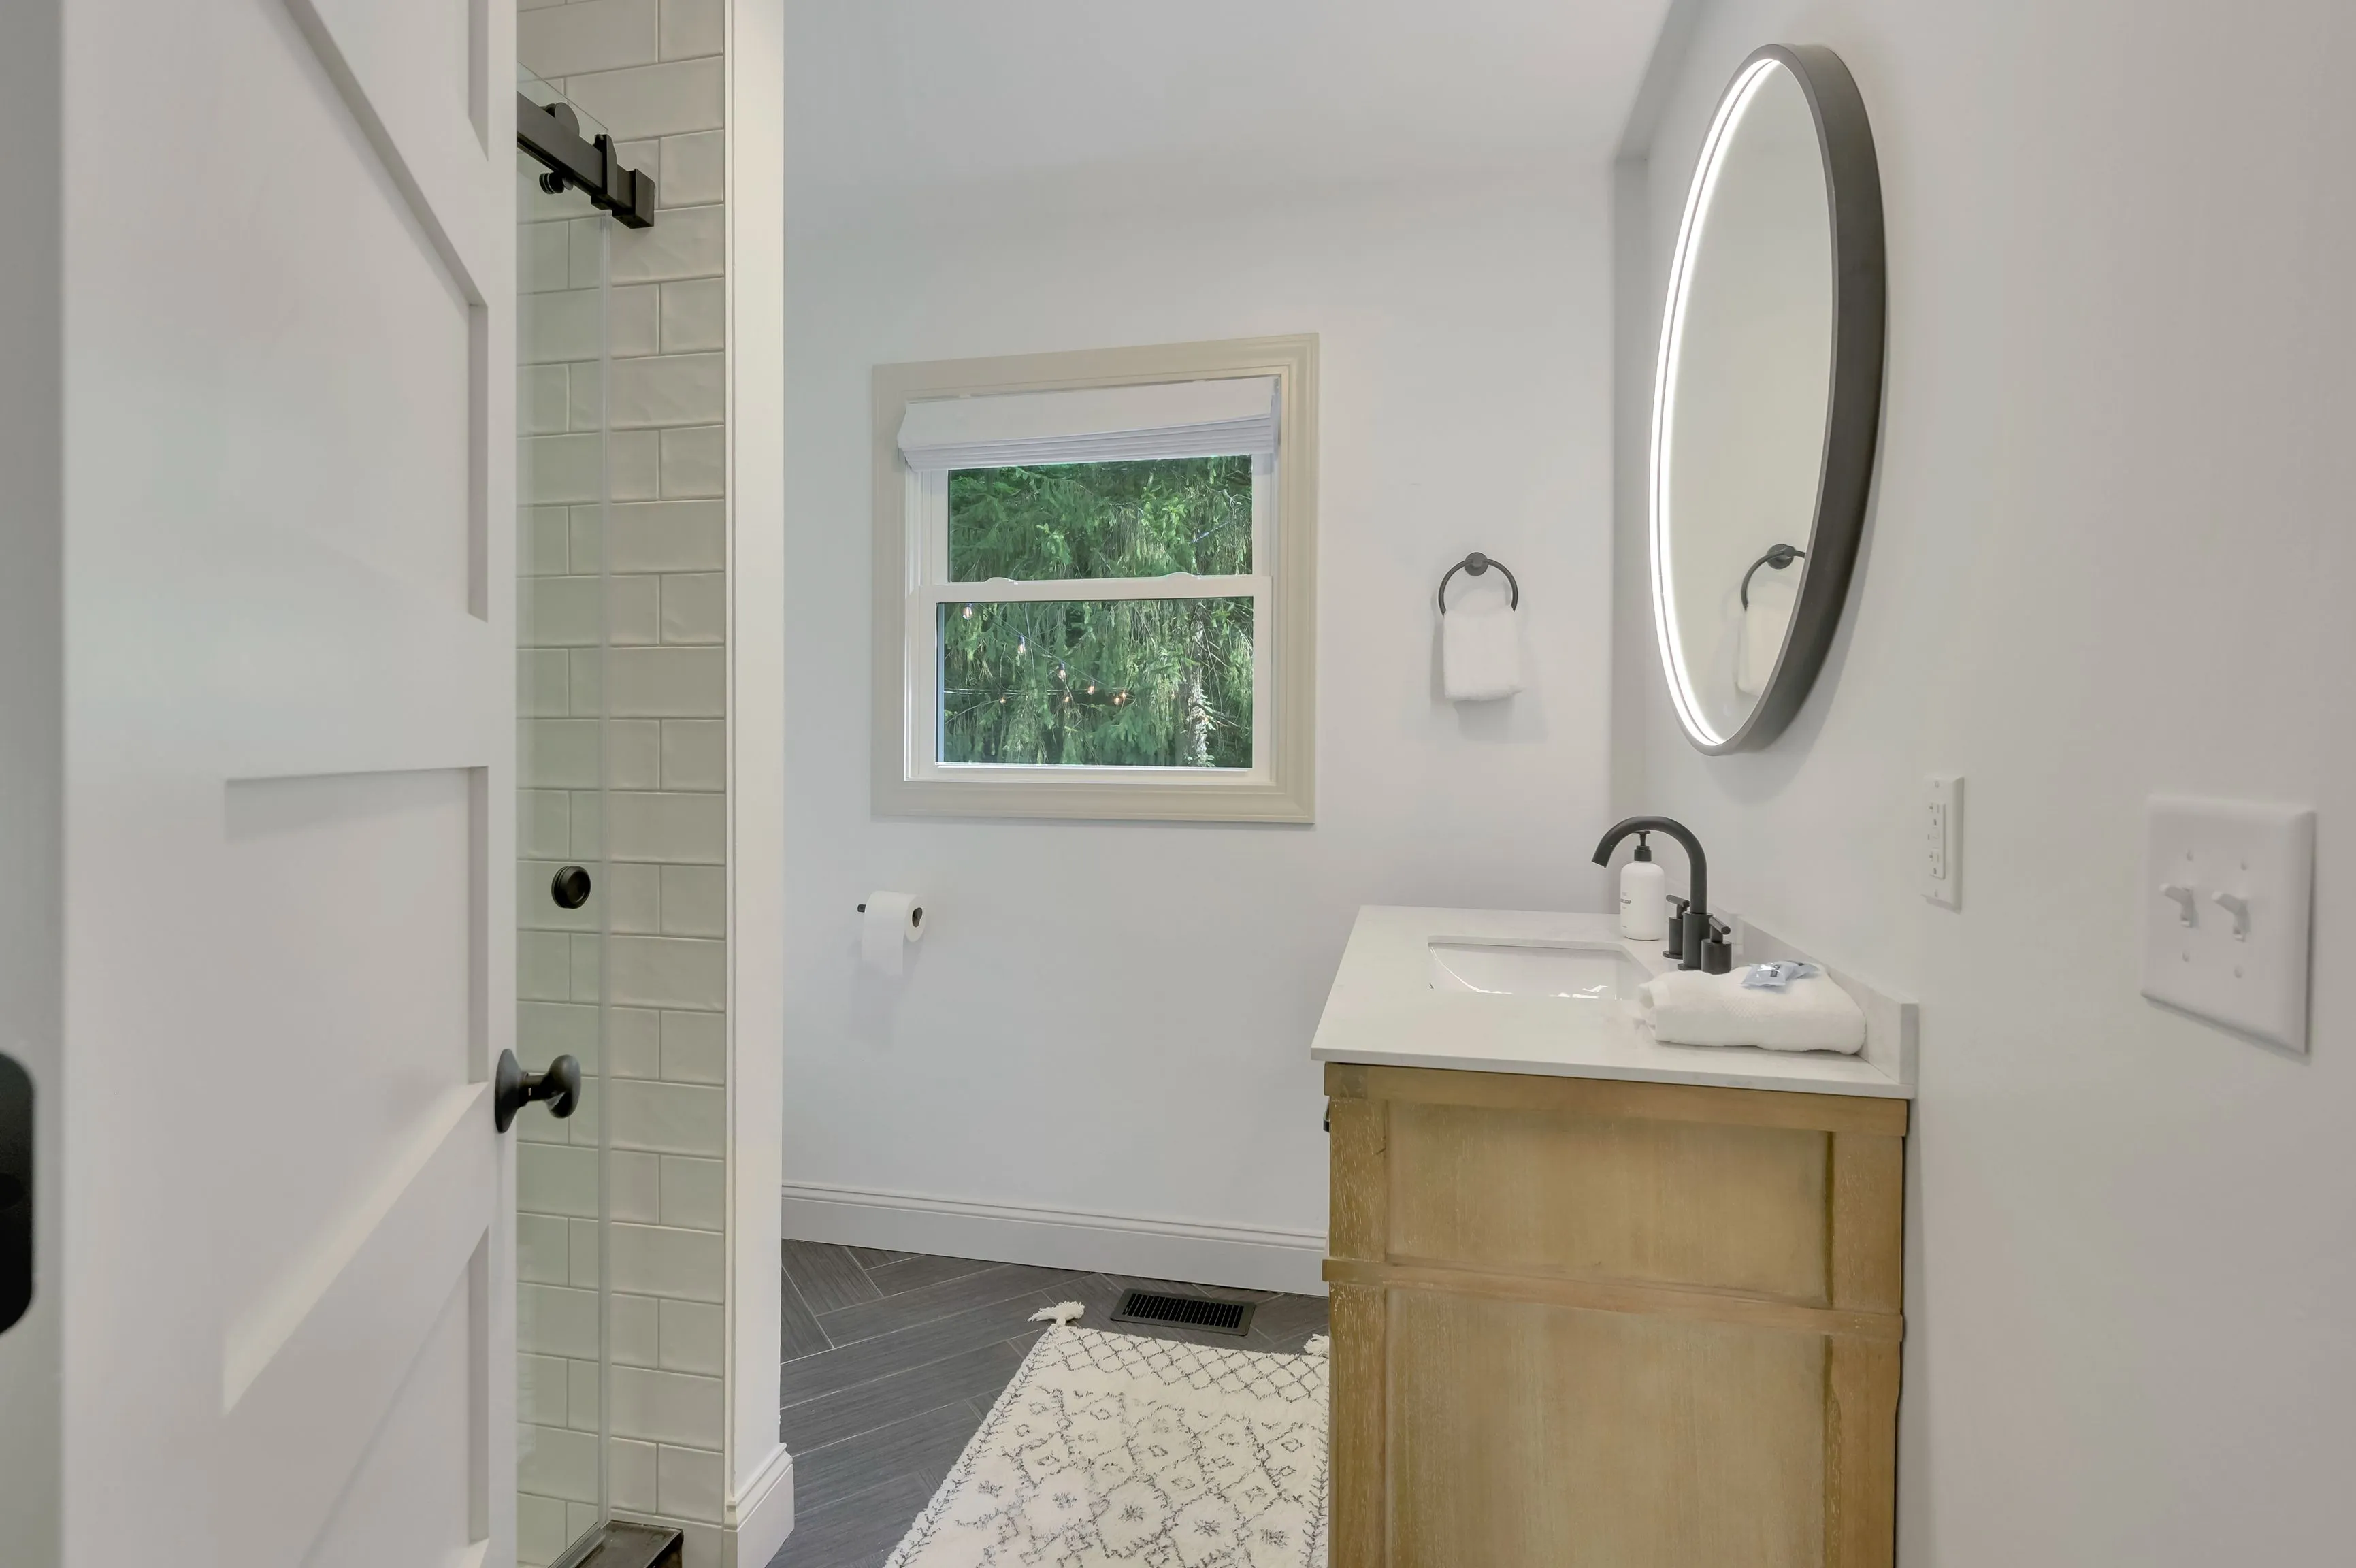 Modern bathroom interior with a wooden vanity, white sink, large round mirror, a window with greenery outside, white subway tiles in the shower, and a patterned rug on the floor.